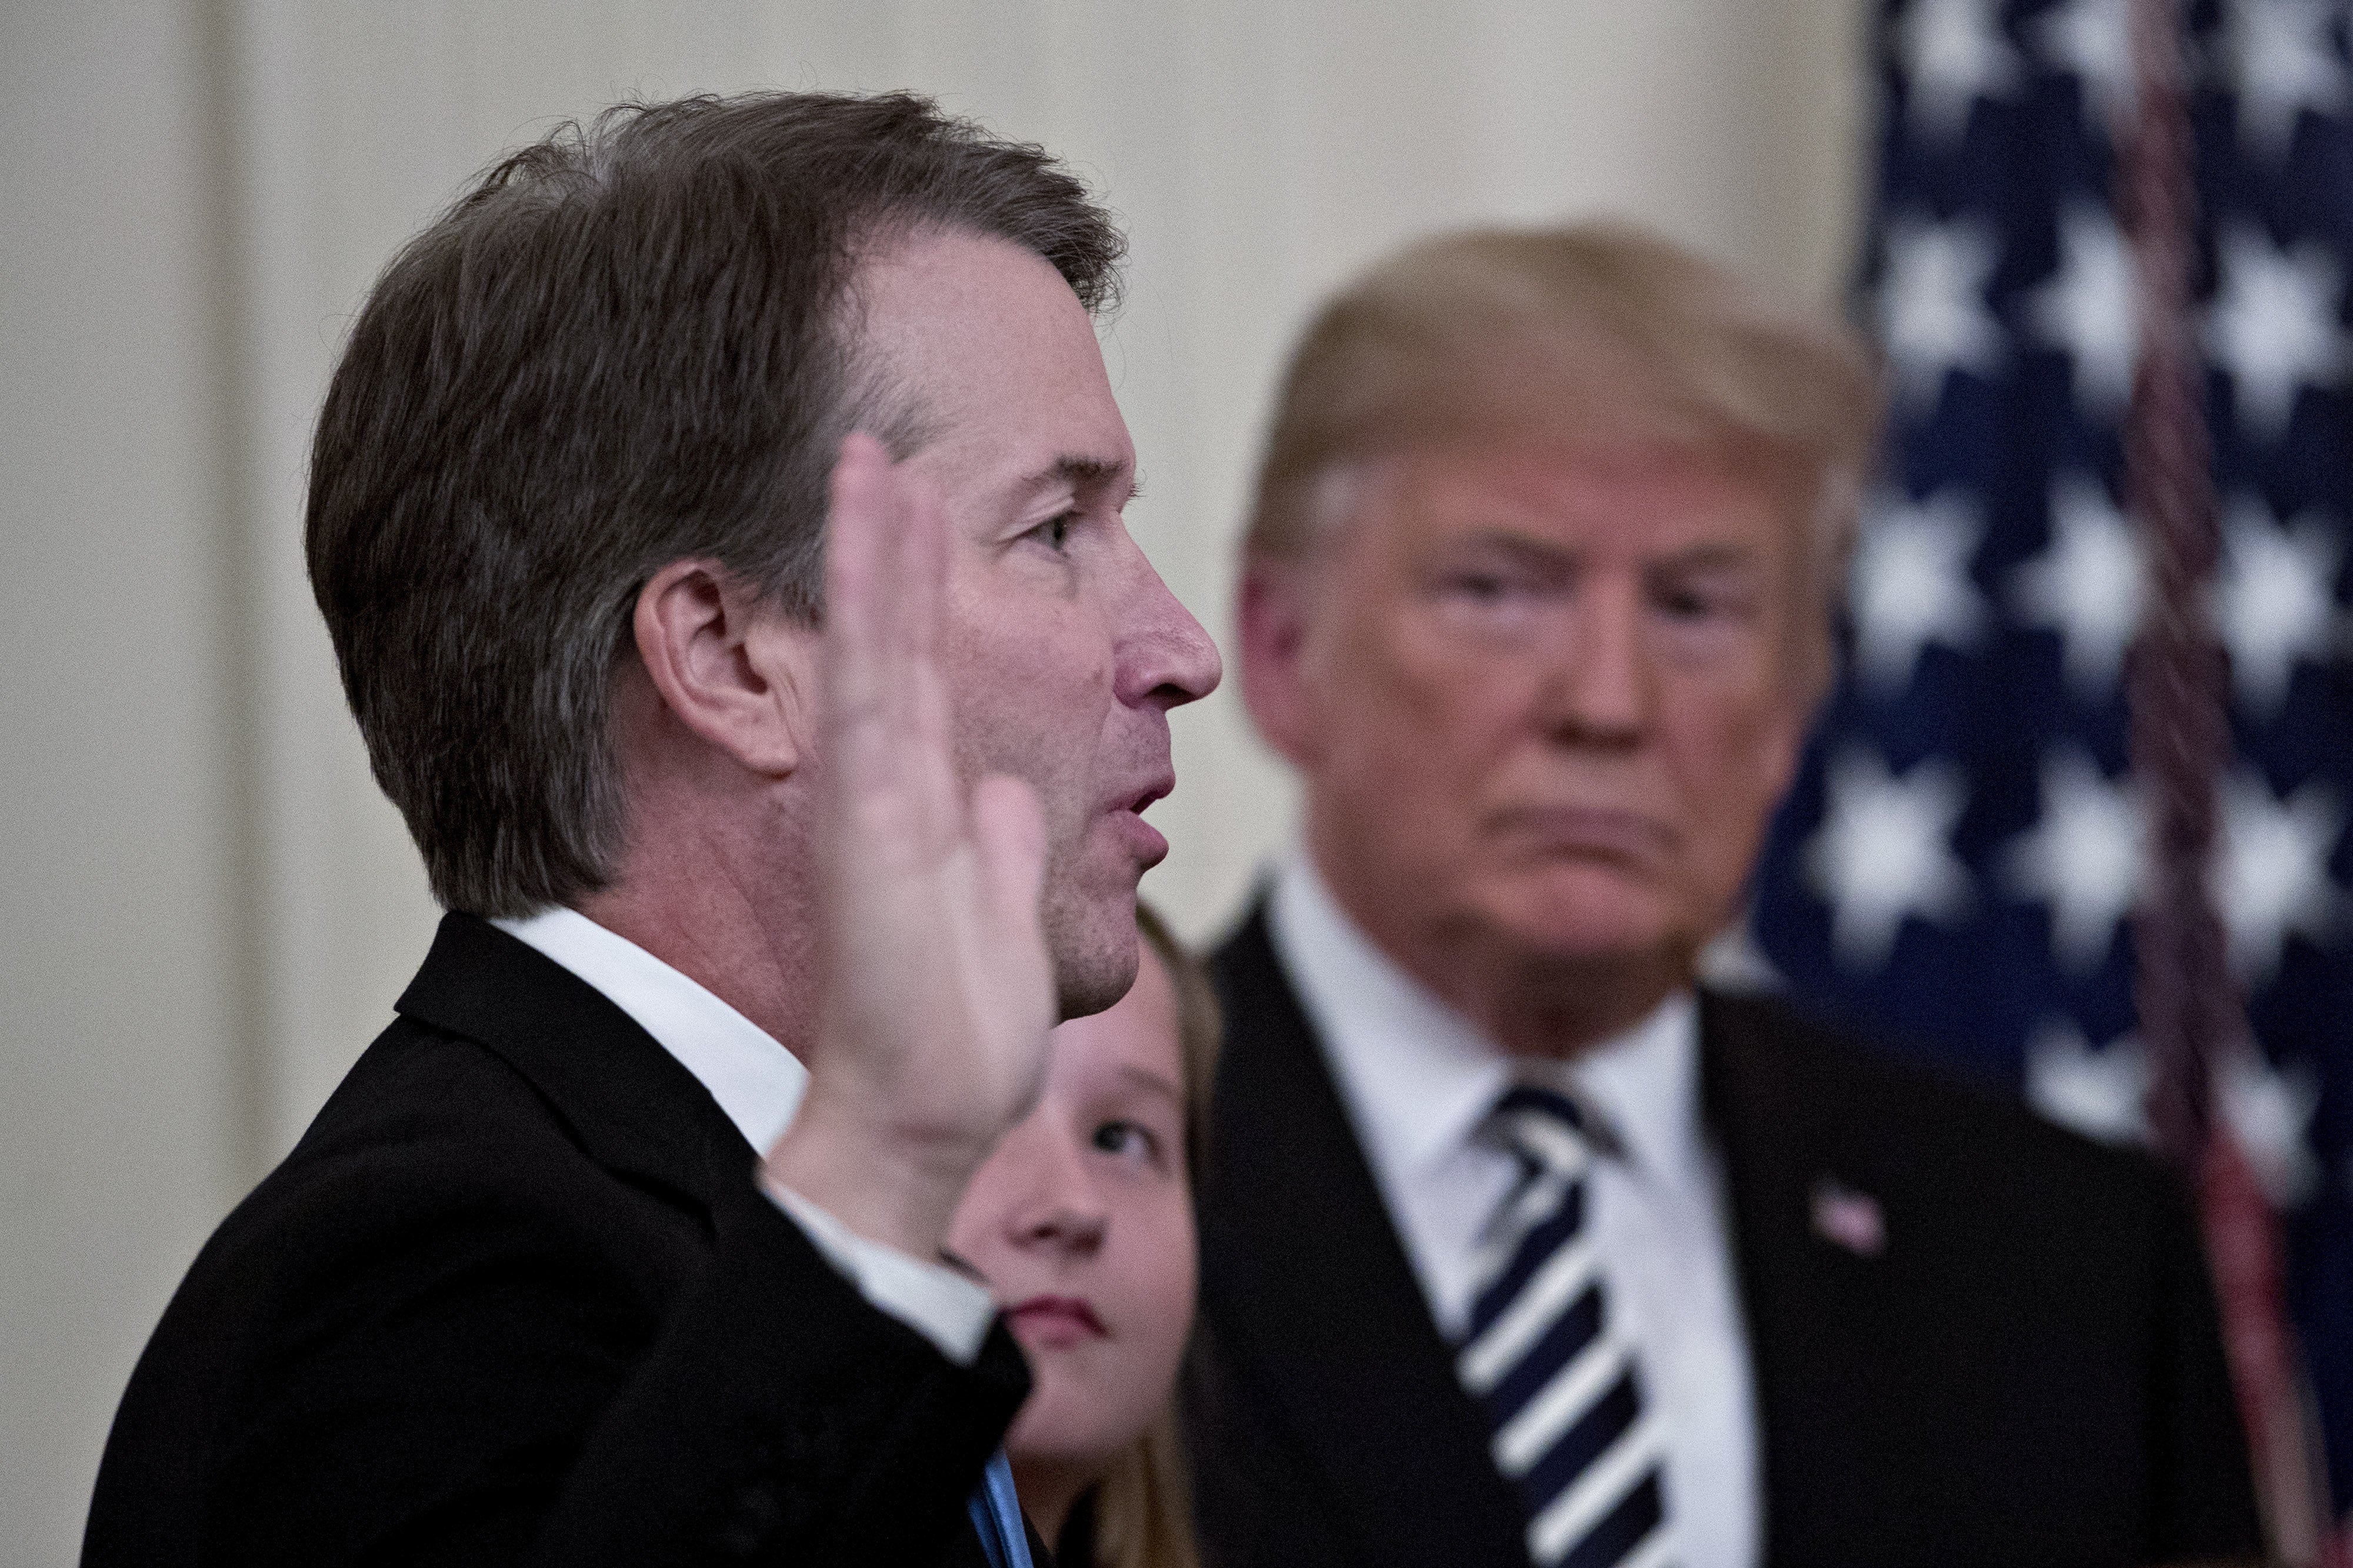 Trump Apologizes To Kavanaugh For 'The Terrible Pain' He Had to Face During His Confirmation Process